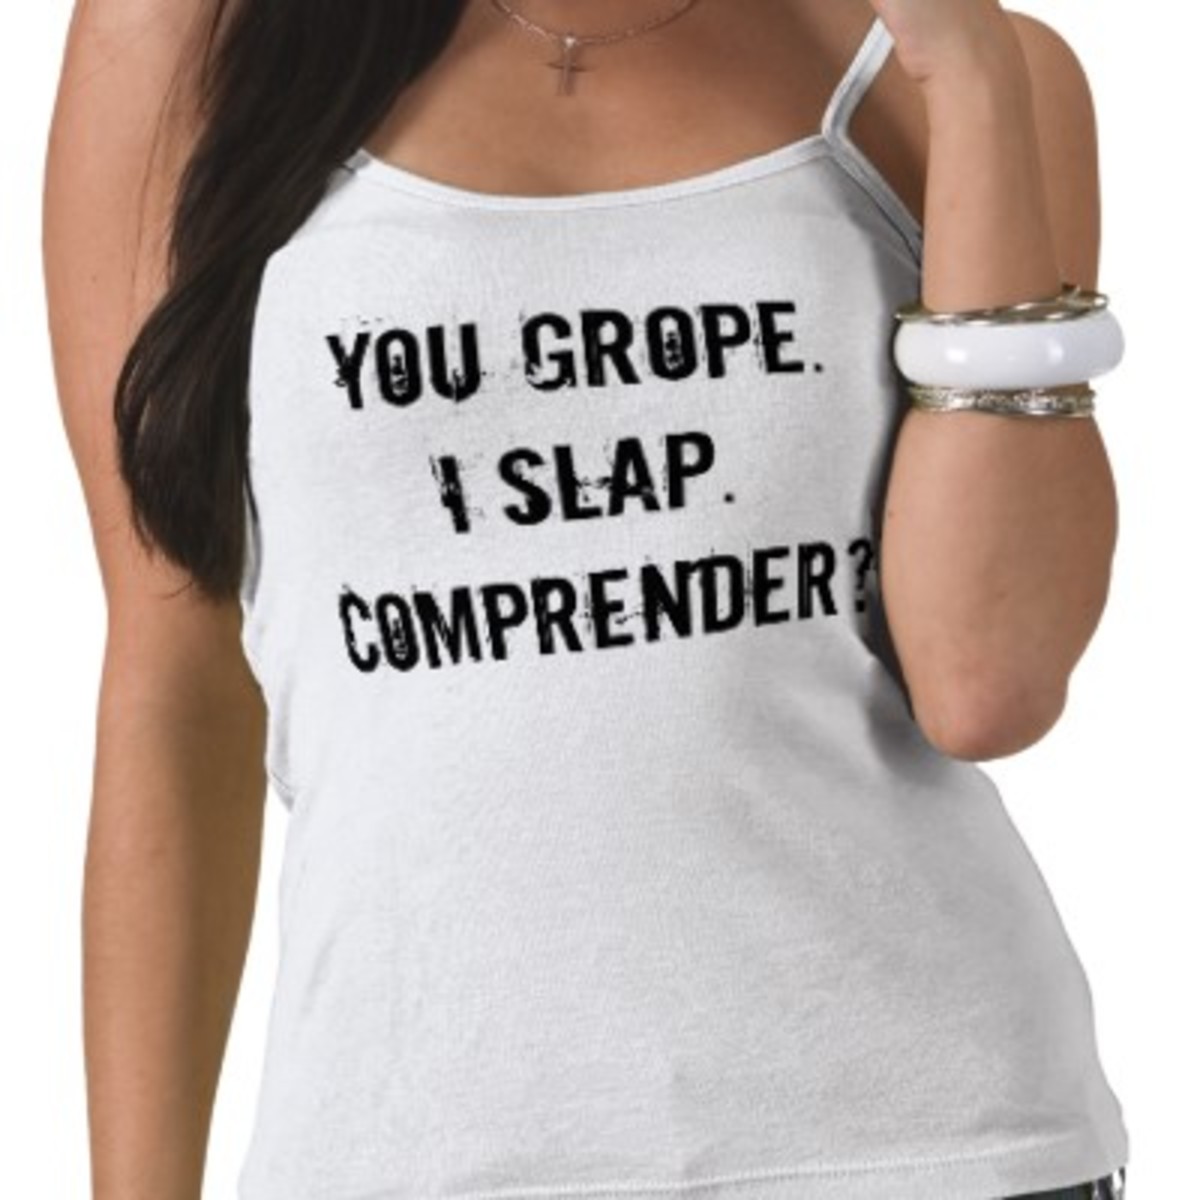 Picture courtesy of http://www.zazzle.com/you_grope_i_slap_comprender_tshirt-235242479414303311